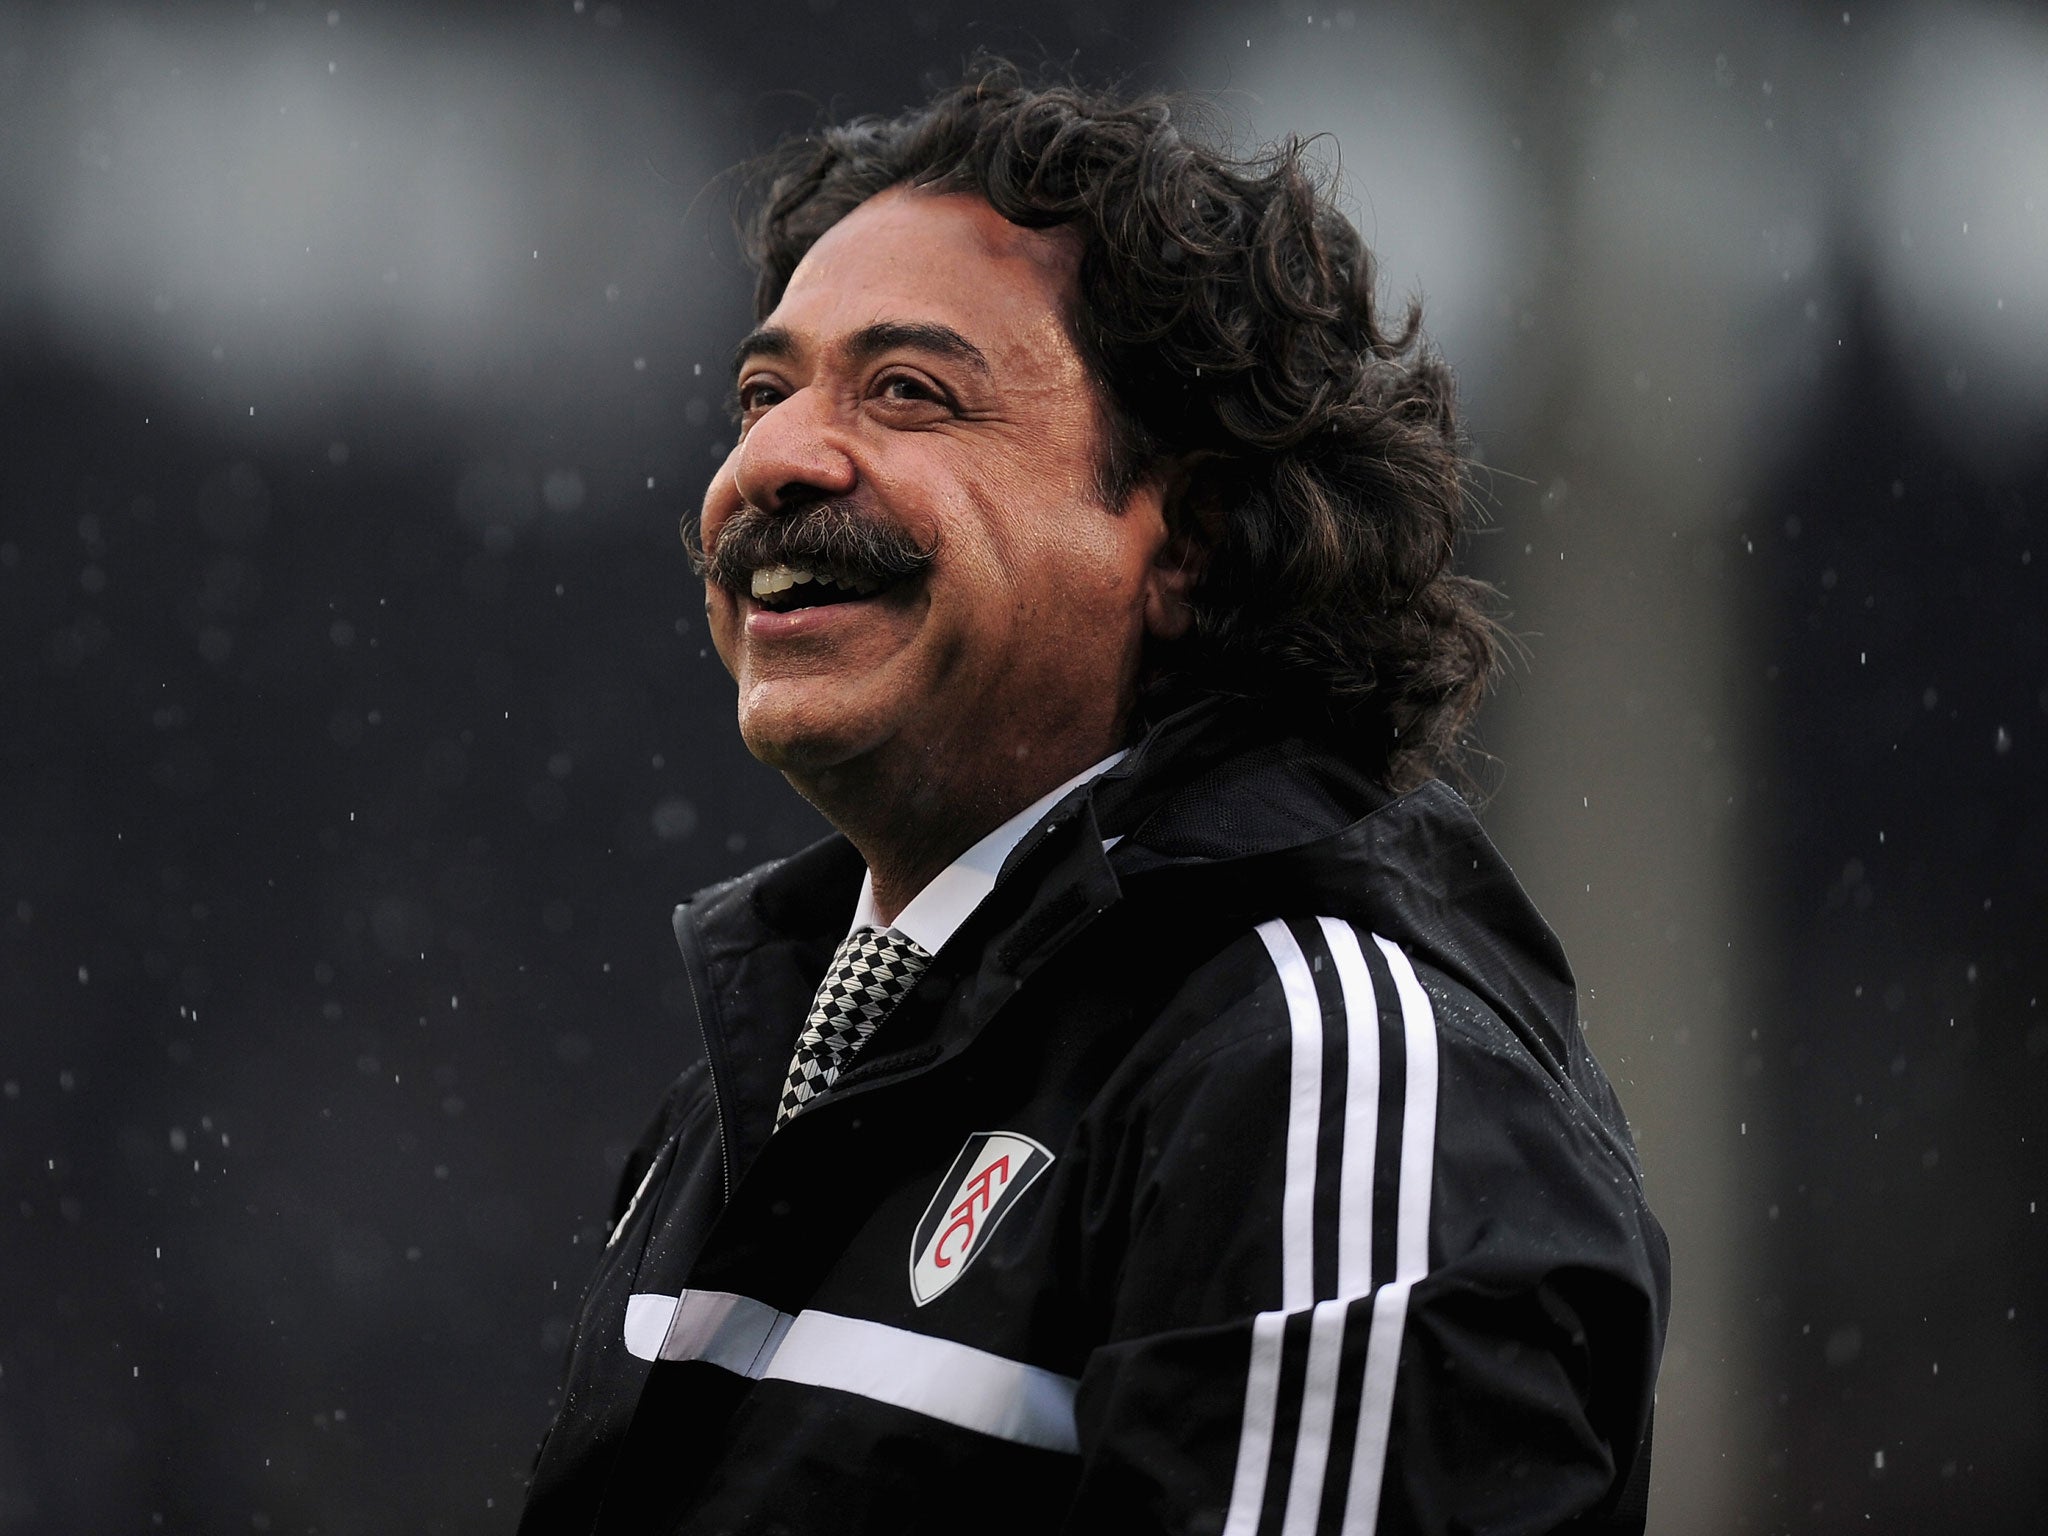 All smiles: Fulham owner Shahid Khan takes in his new surroundings